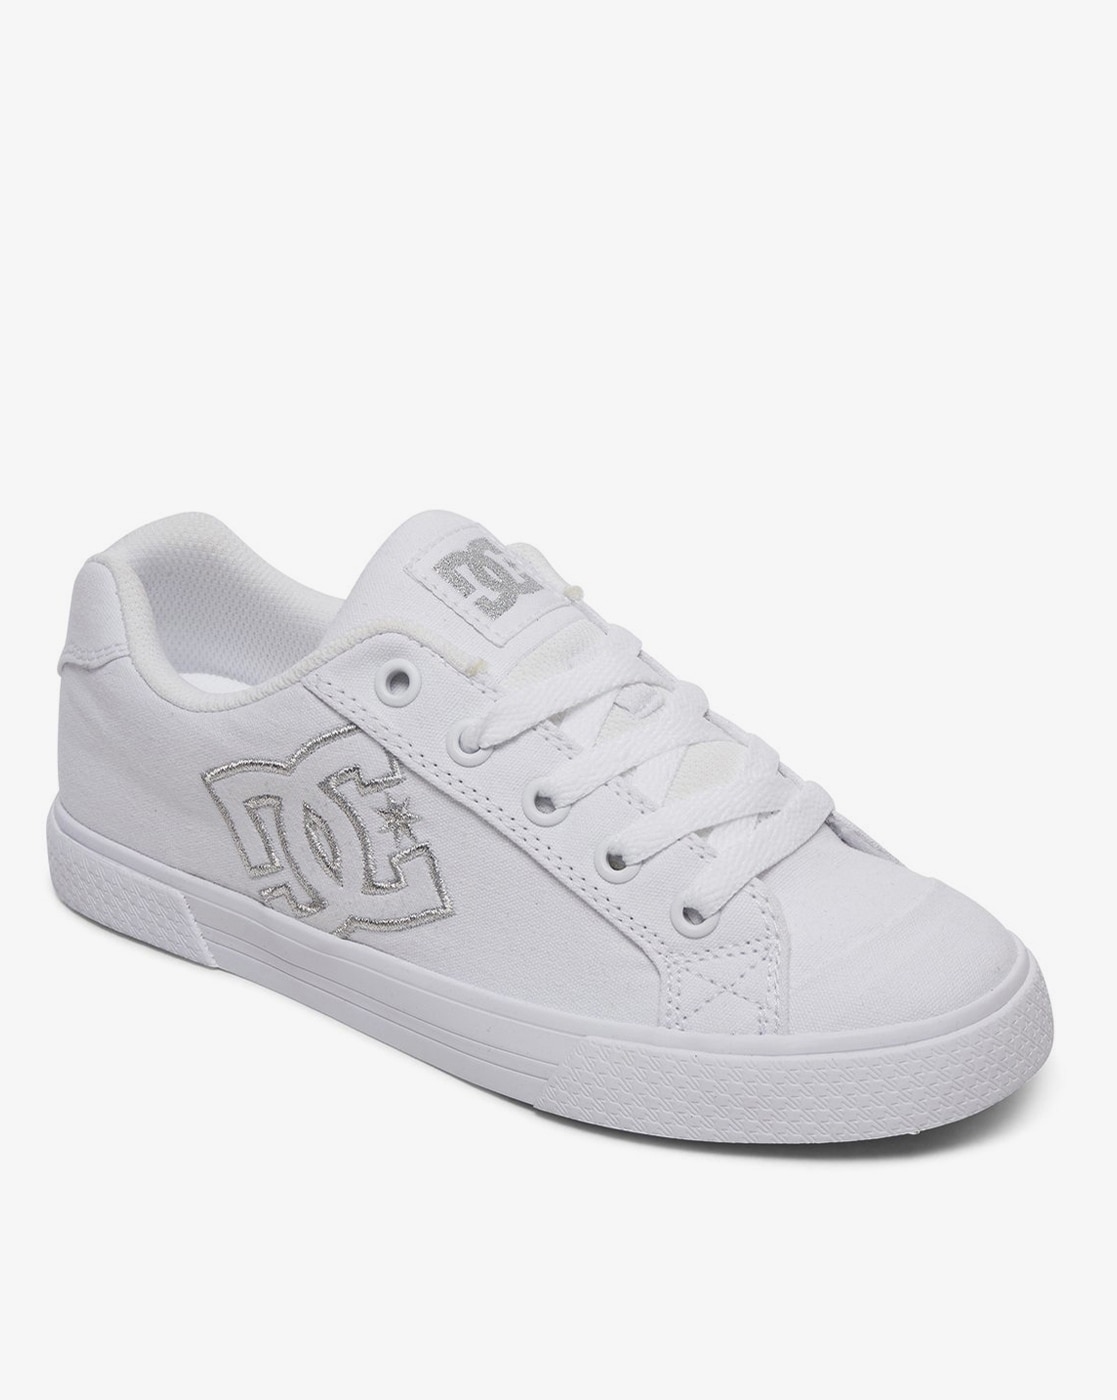 DC Shoes Manteca 4 Womens Skate Trainers in Pink White | Fruugo NO